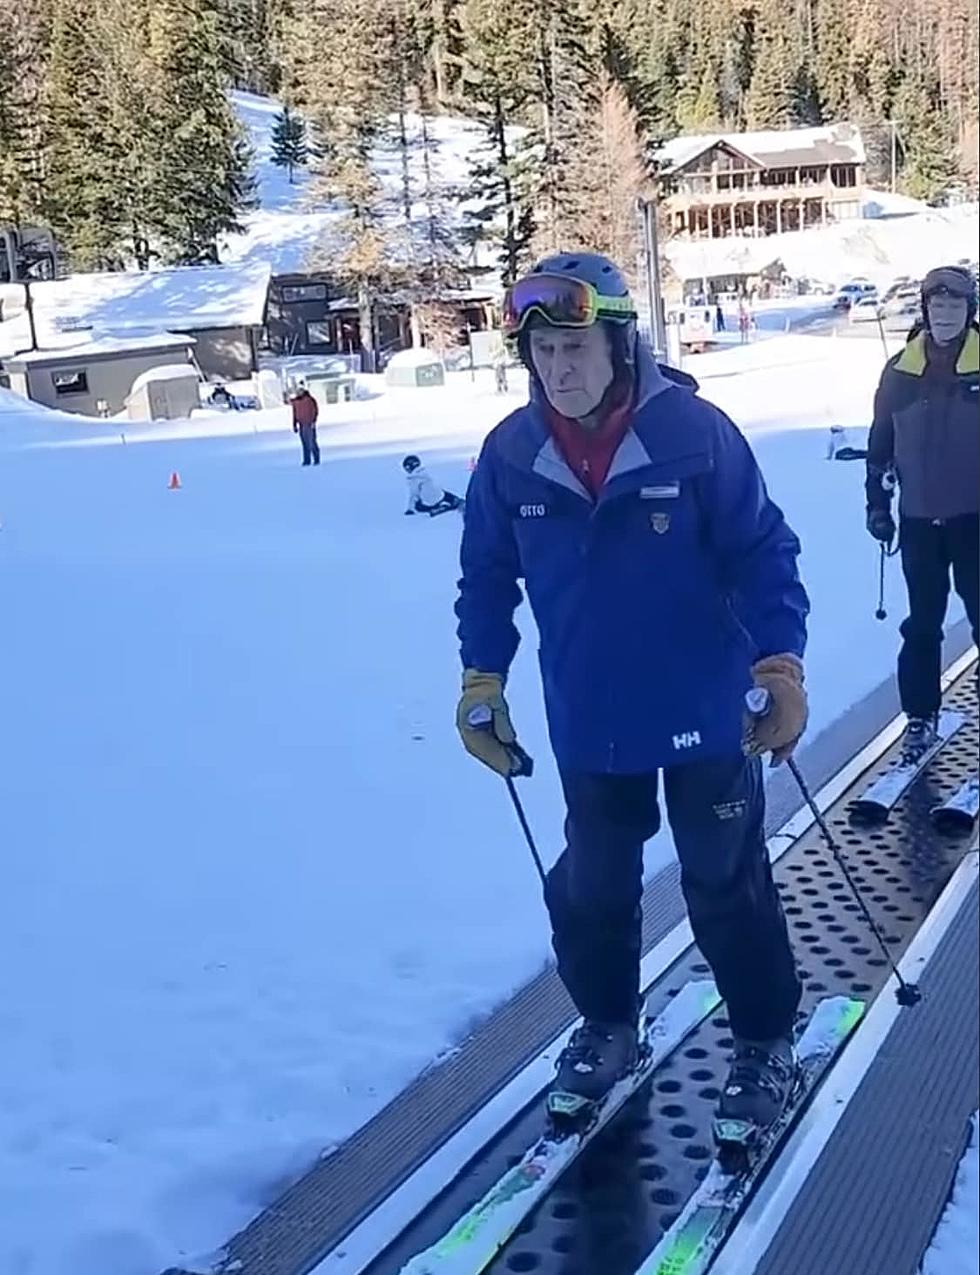 Mission Ridge Ski Instructor - Back for His 72nd Year!